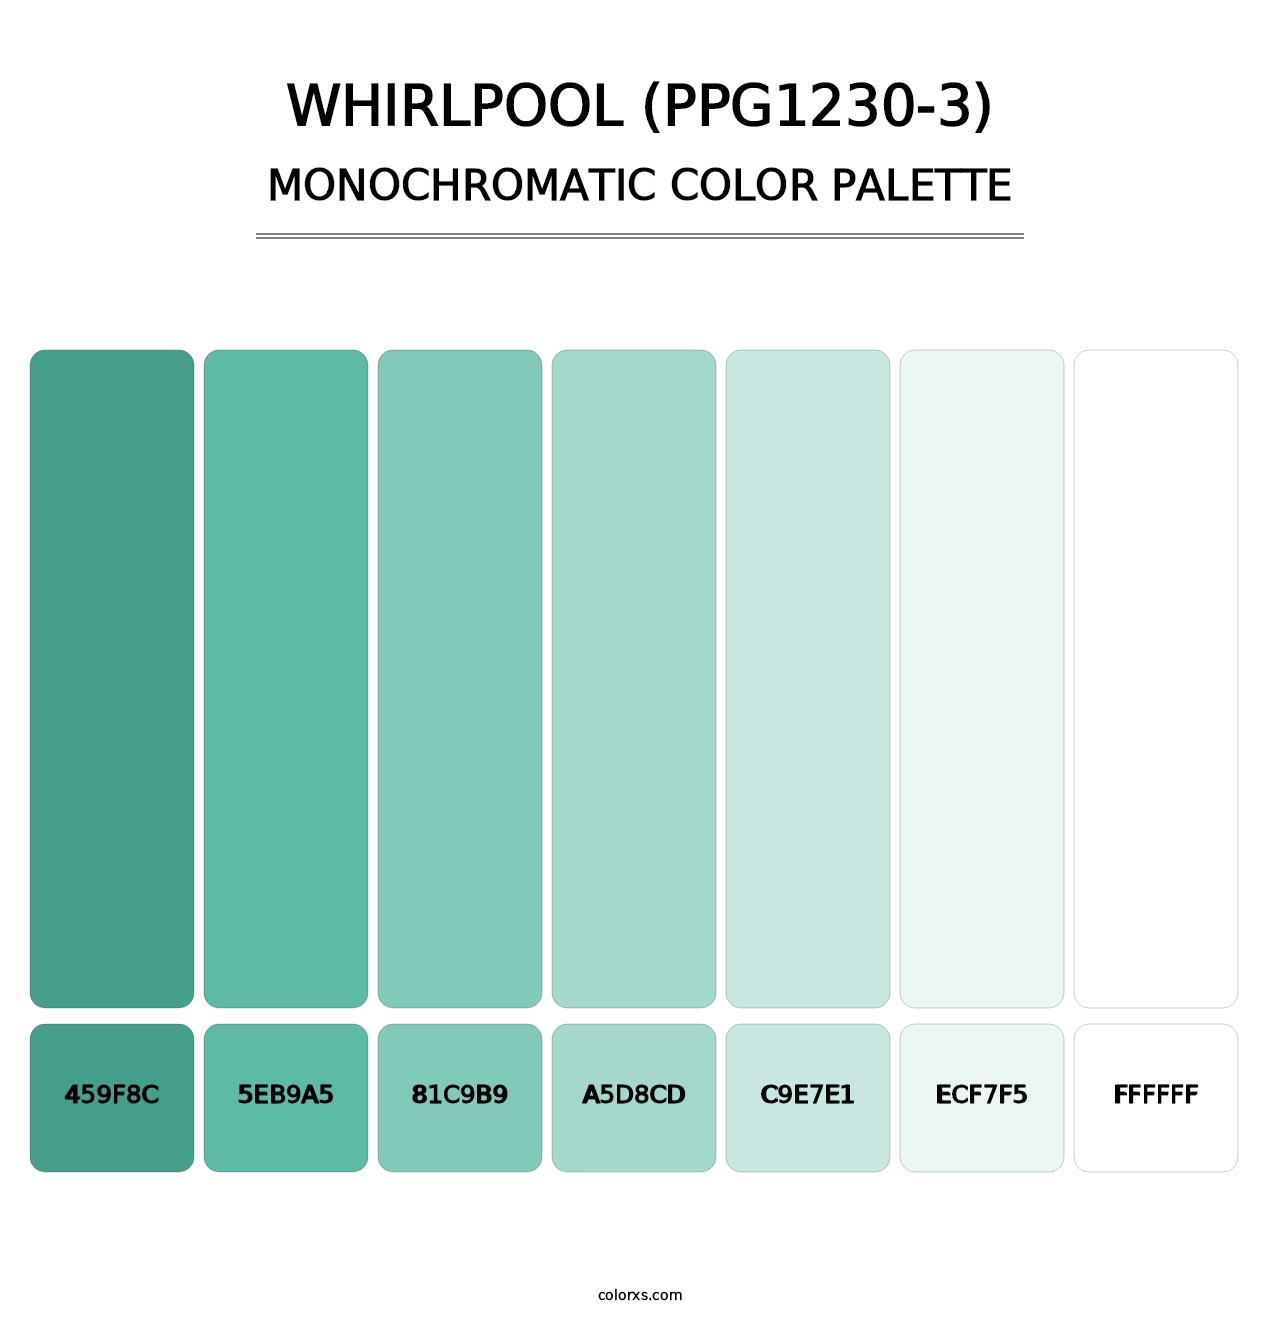 Whirlpool (PPG1230-3) - Monochromatic Color Palette